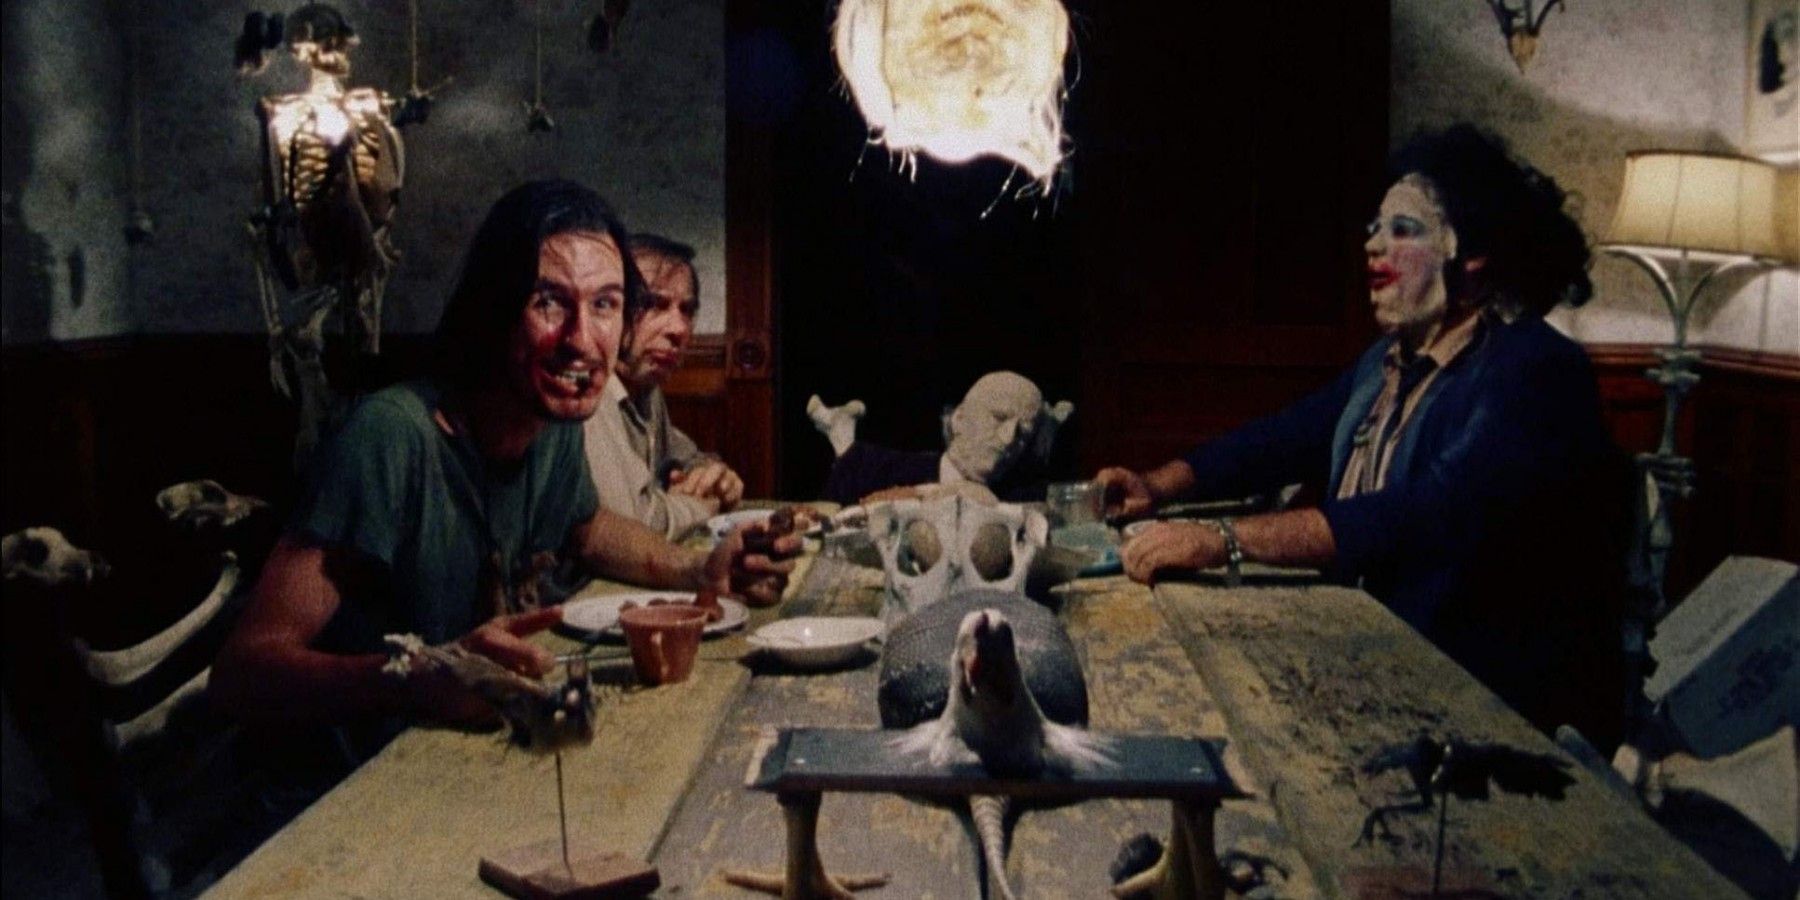 10 Facts You Didn’t Know About The Making Of The Texas Chainsaw Massacre